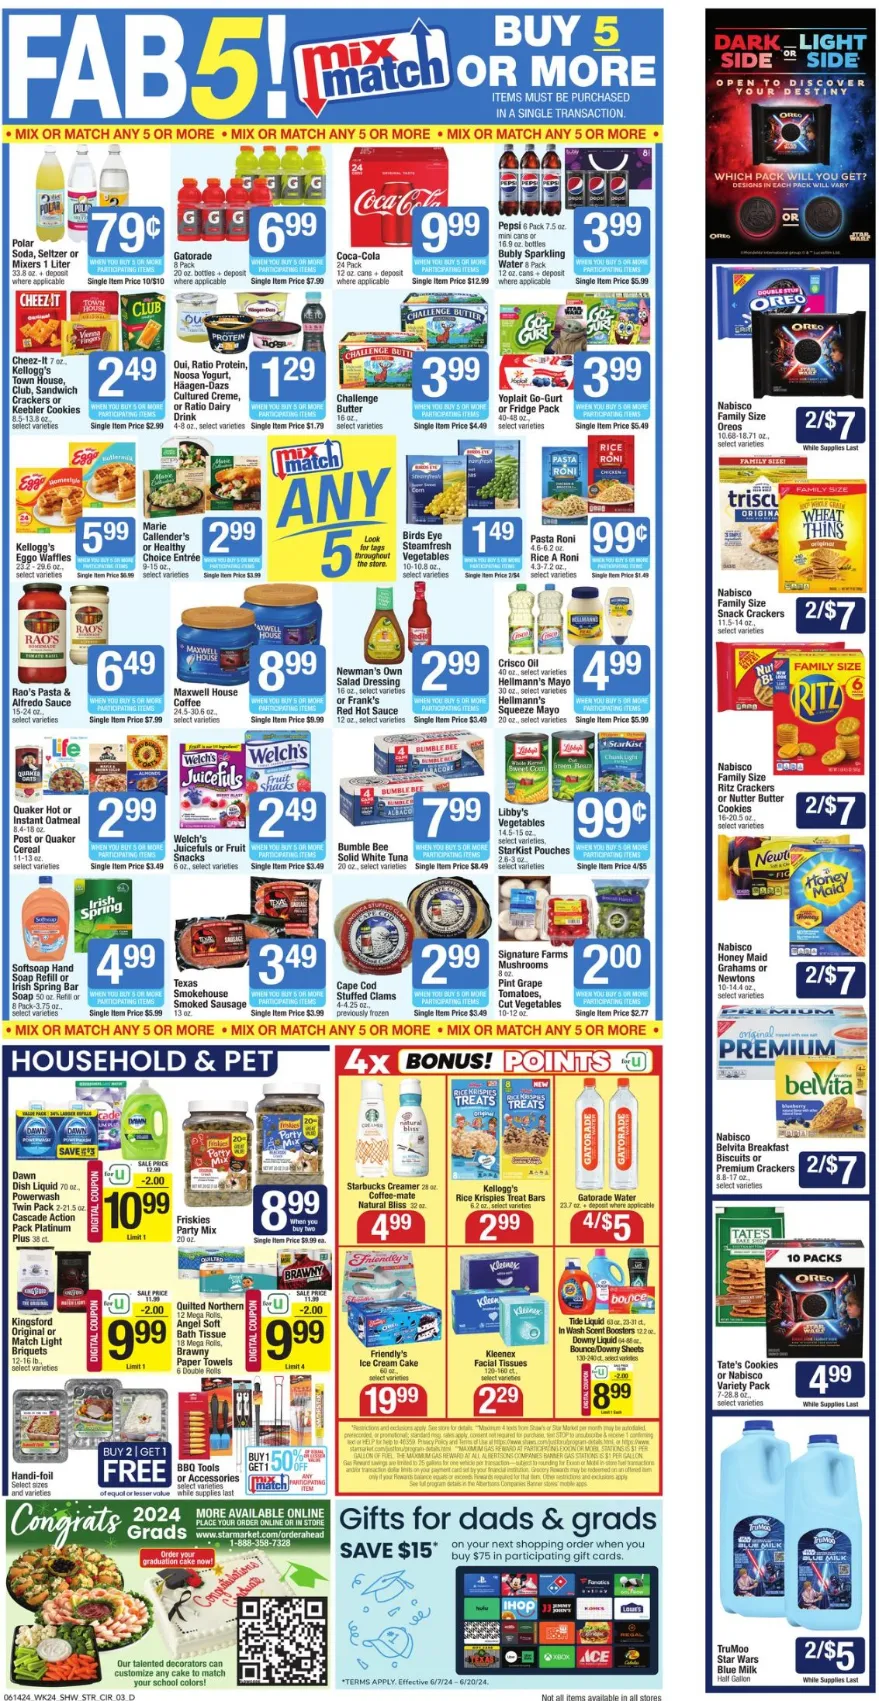 Star Market Weekly Ad July 2024 Weekly Sales, Deals, Discounts and Digital Coupons.